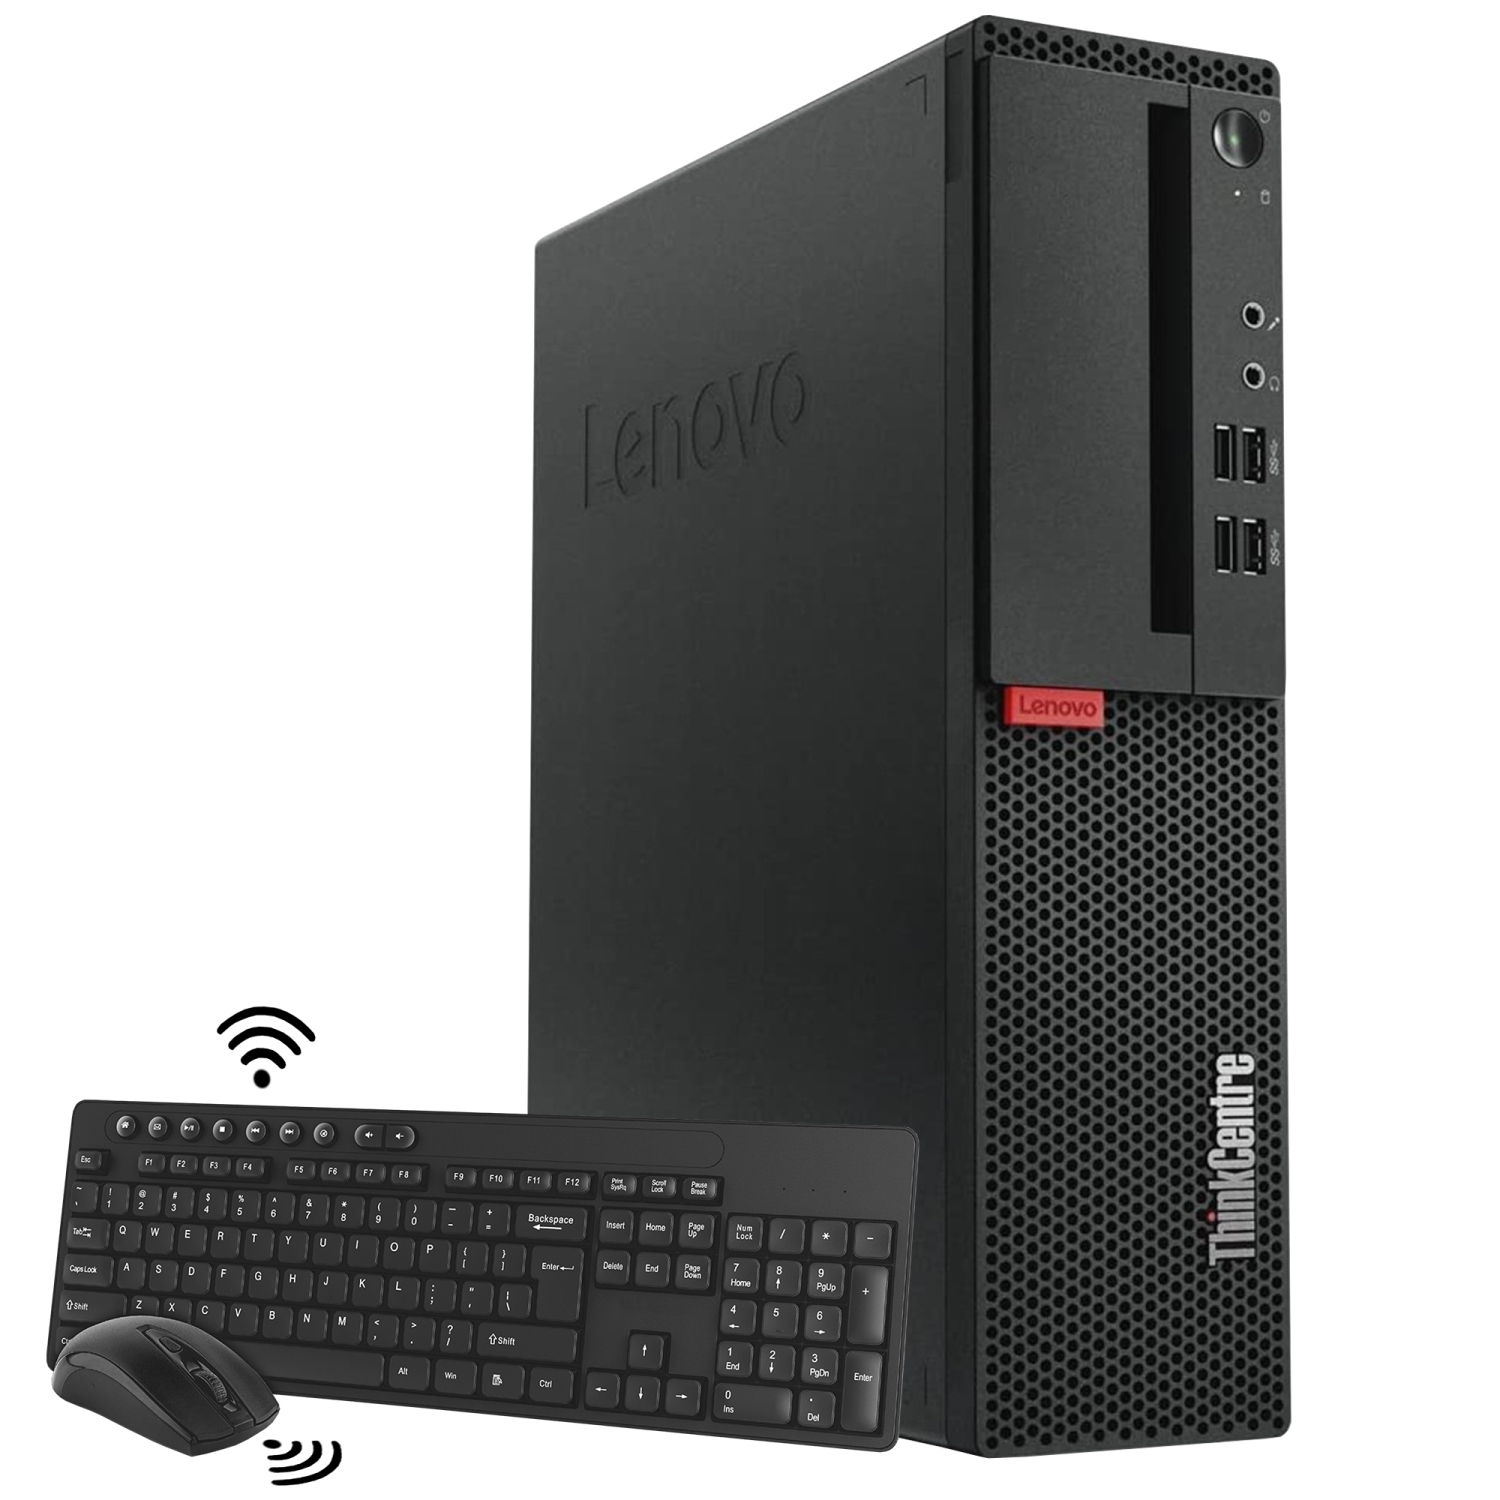 Refurbished(Good) - Business Desktop Solution Lenovo ThinkCentre M710s SFF Computer PC| Intel Core i5 Processor| 1TB SSD| 32GB DDR4 RAM| Windows 10 Pro| Wireless Keyboard and Mouse